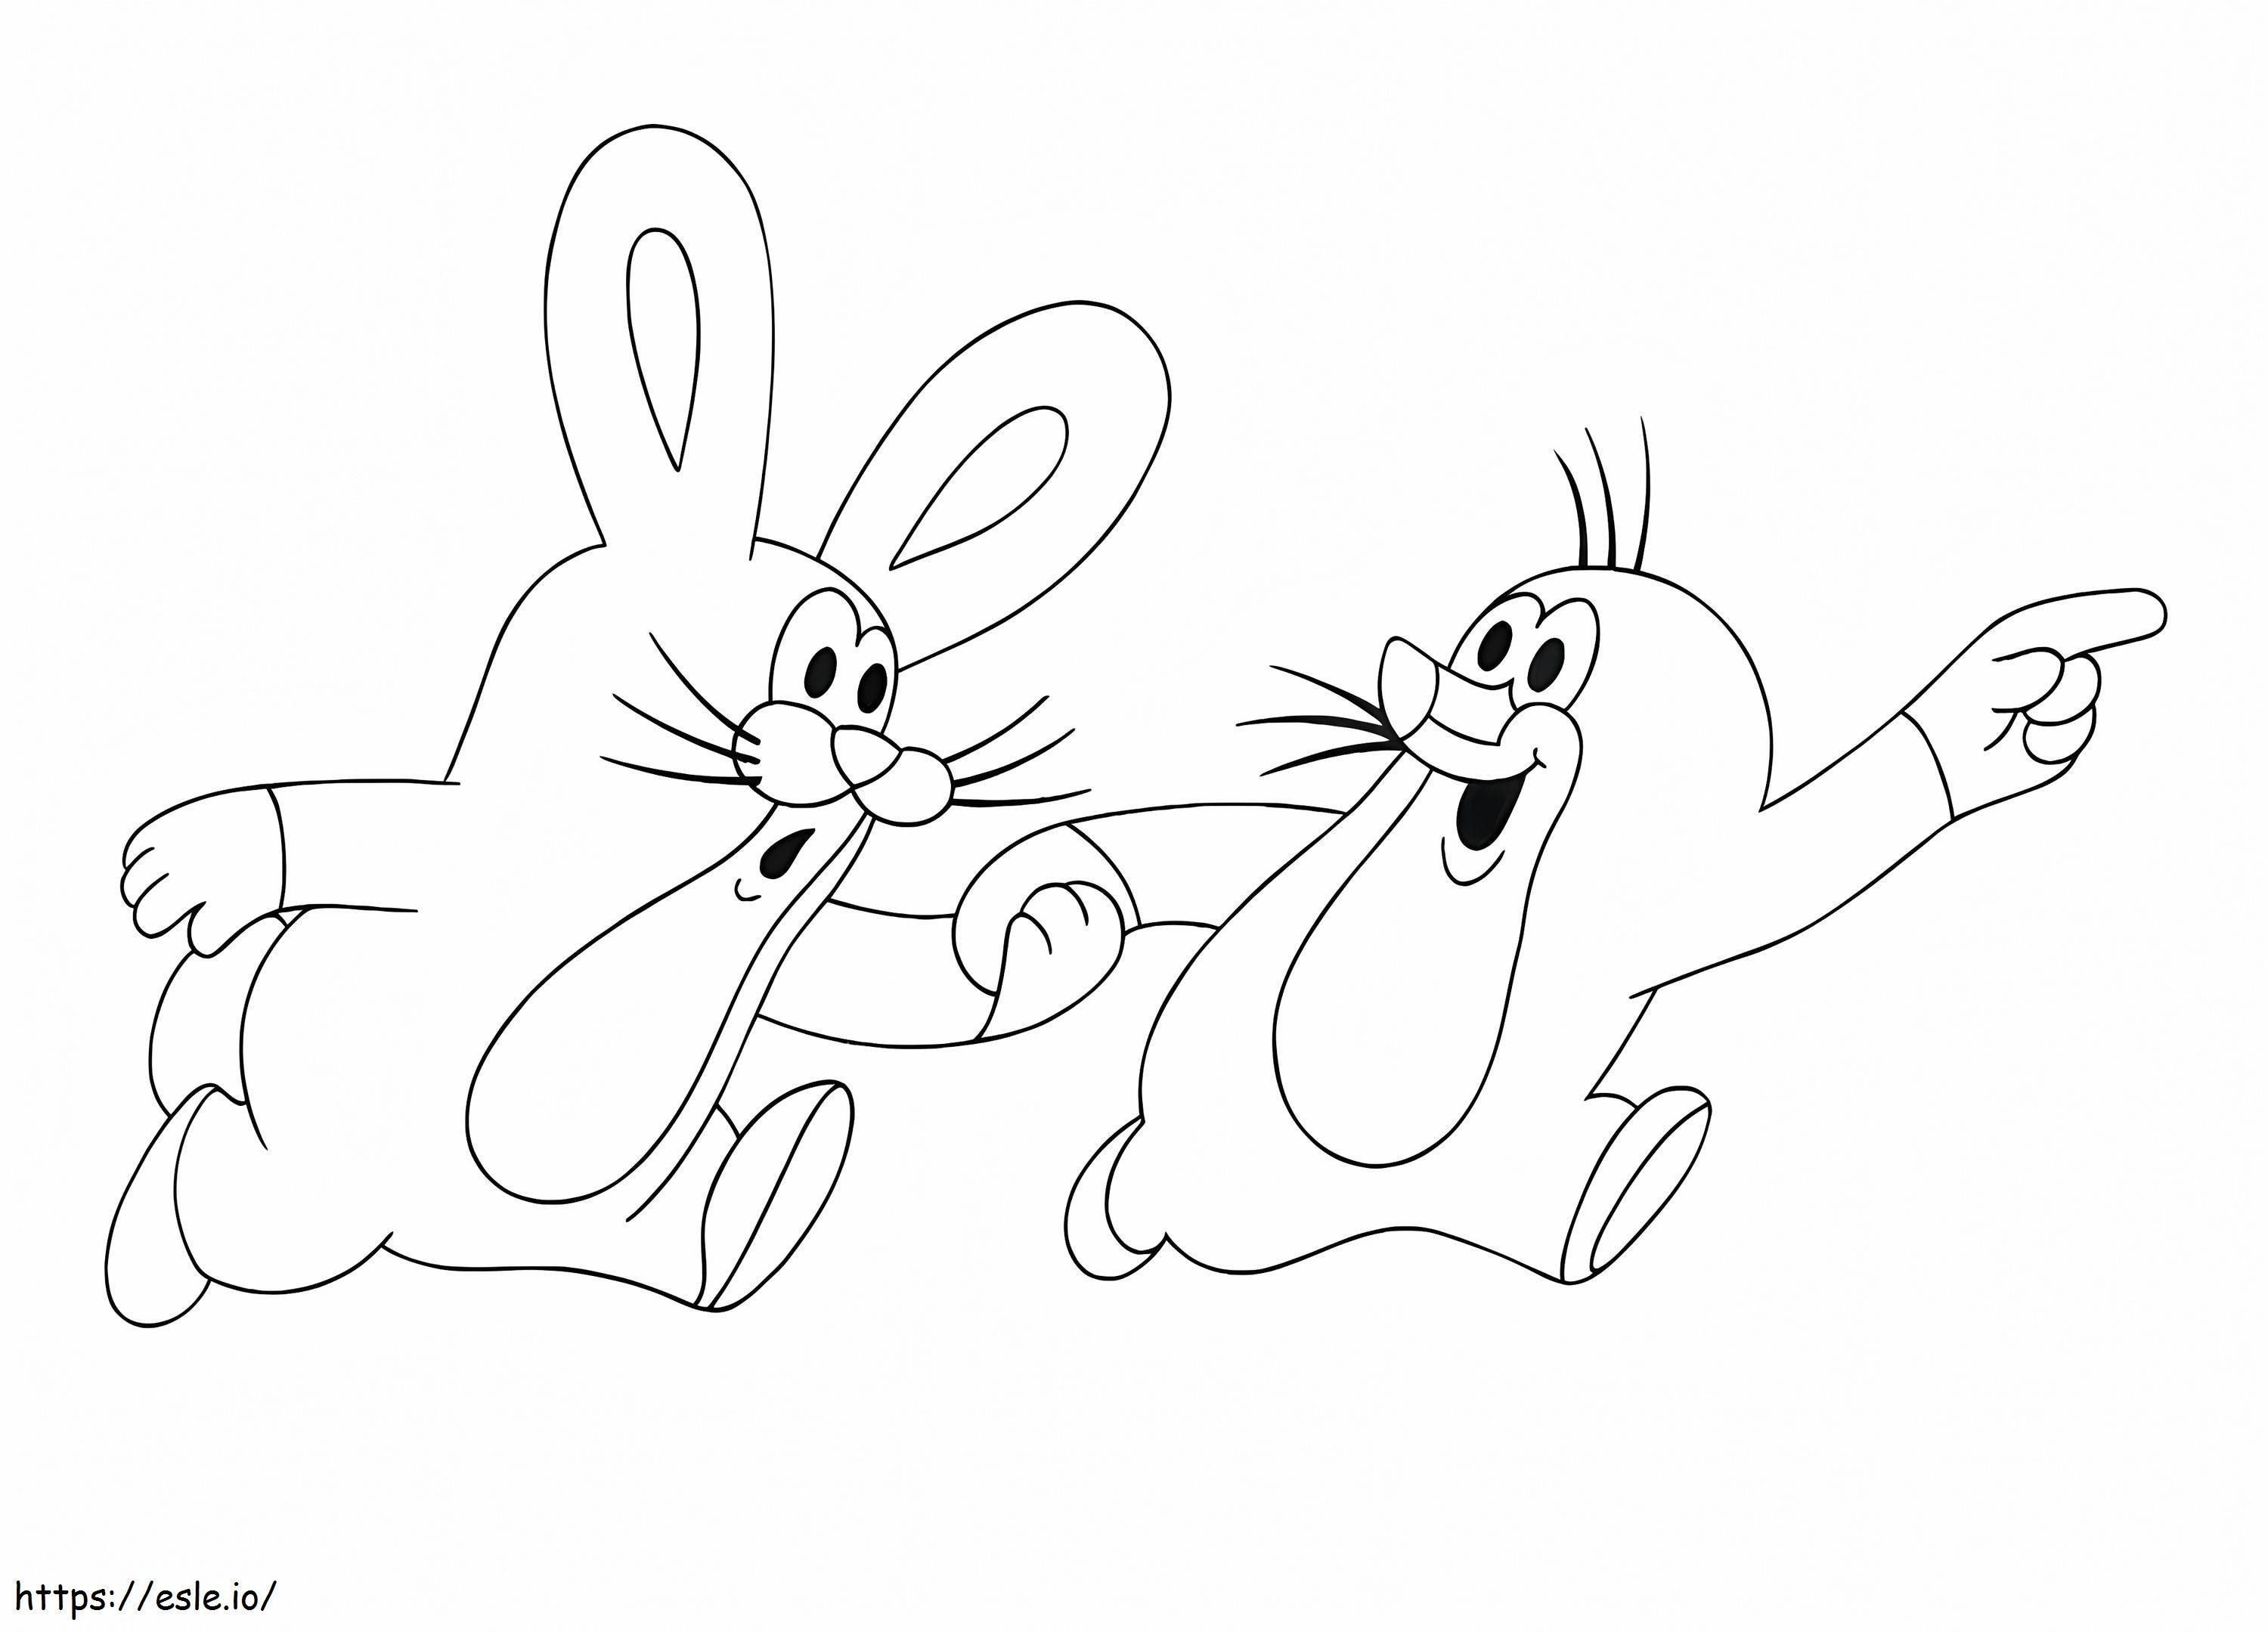 Little Bunny And Krtek coloring page